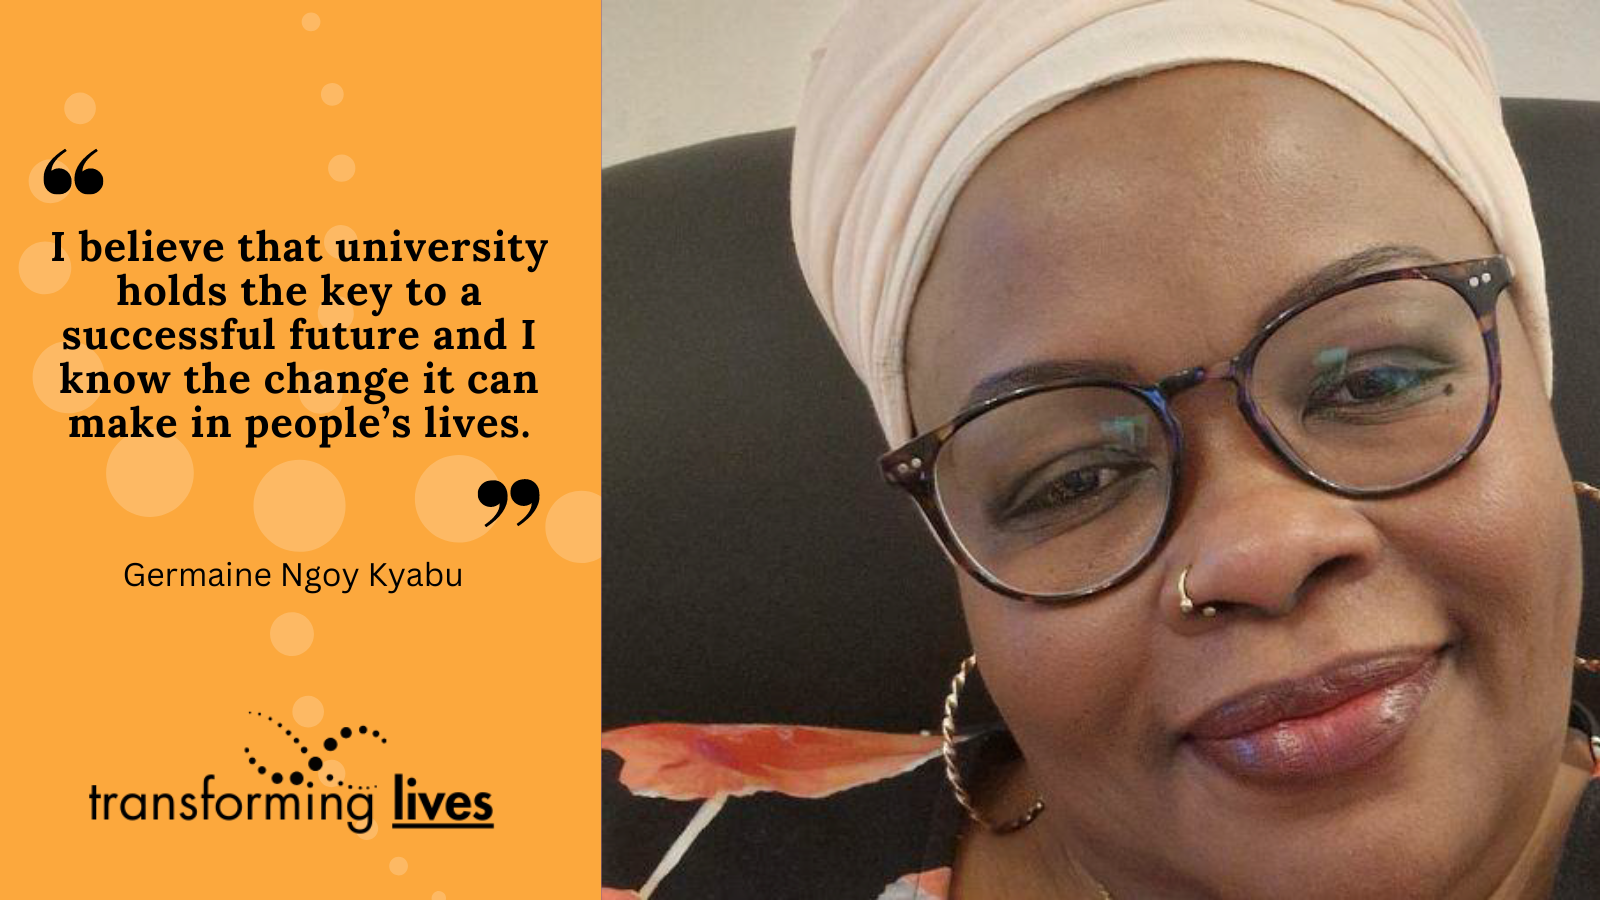 "I believe that university holds the key to a successful future and I know the change it can make in people’s lives."